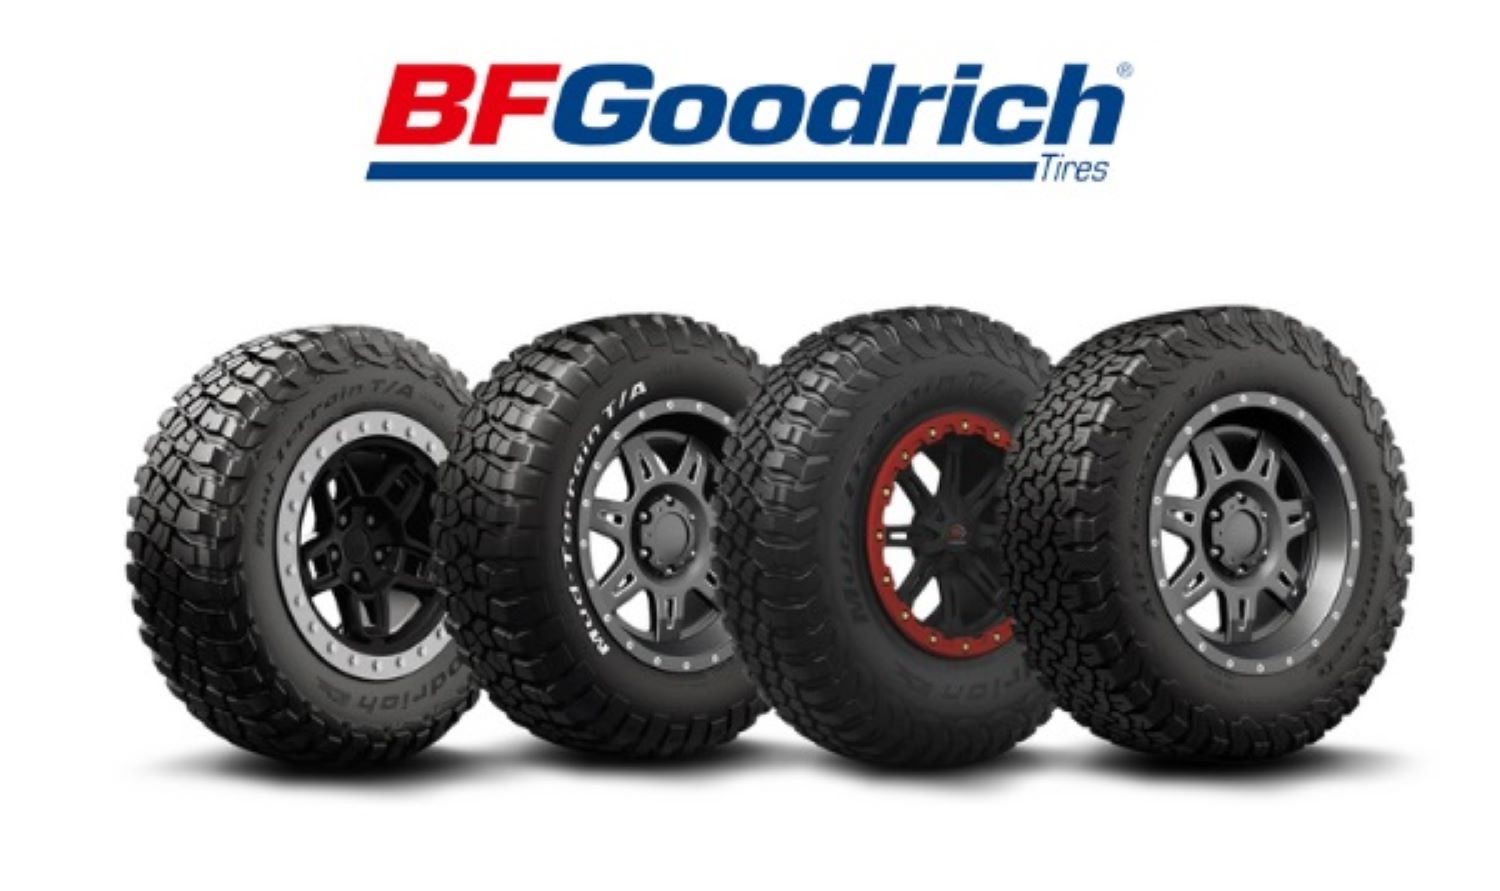 19-facts-about-bfgoodrich